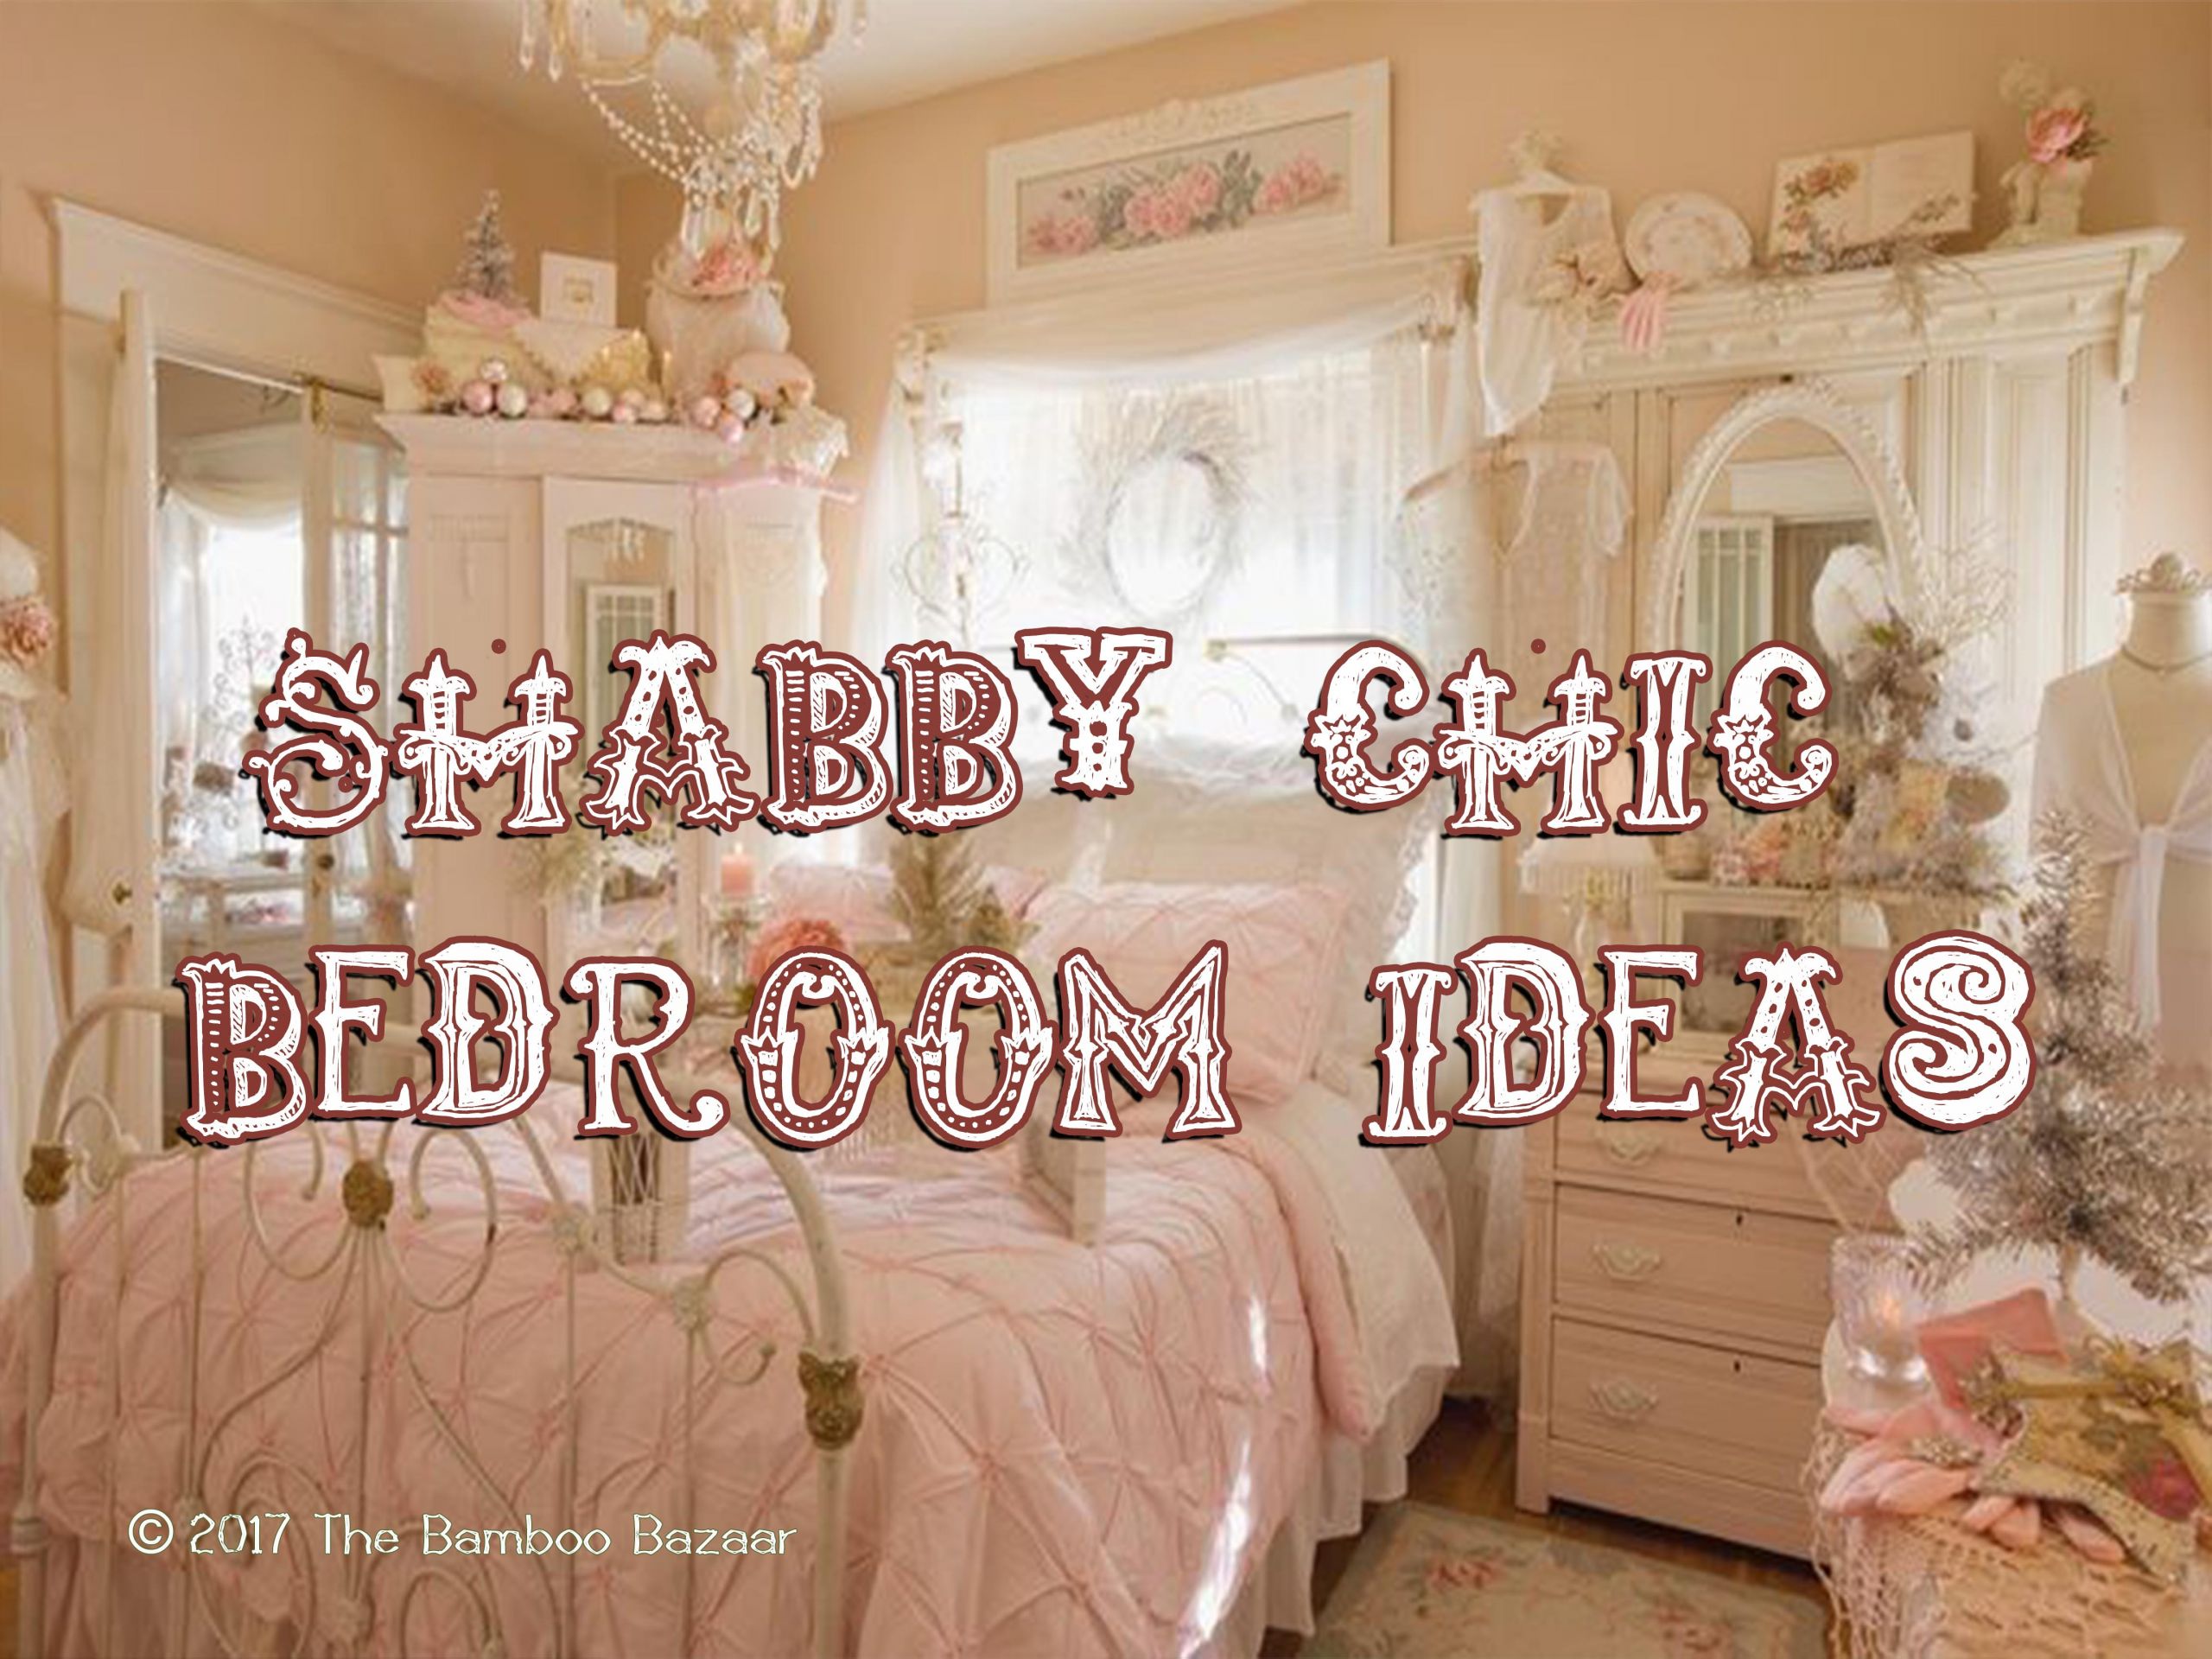 Shabby Chic Bedrooms Images
 The Bamboo Bazaar for Bamboo Products and Rustic Decor